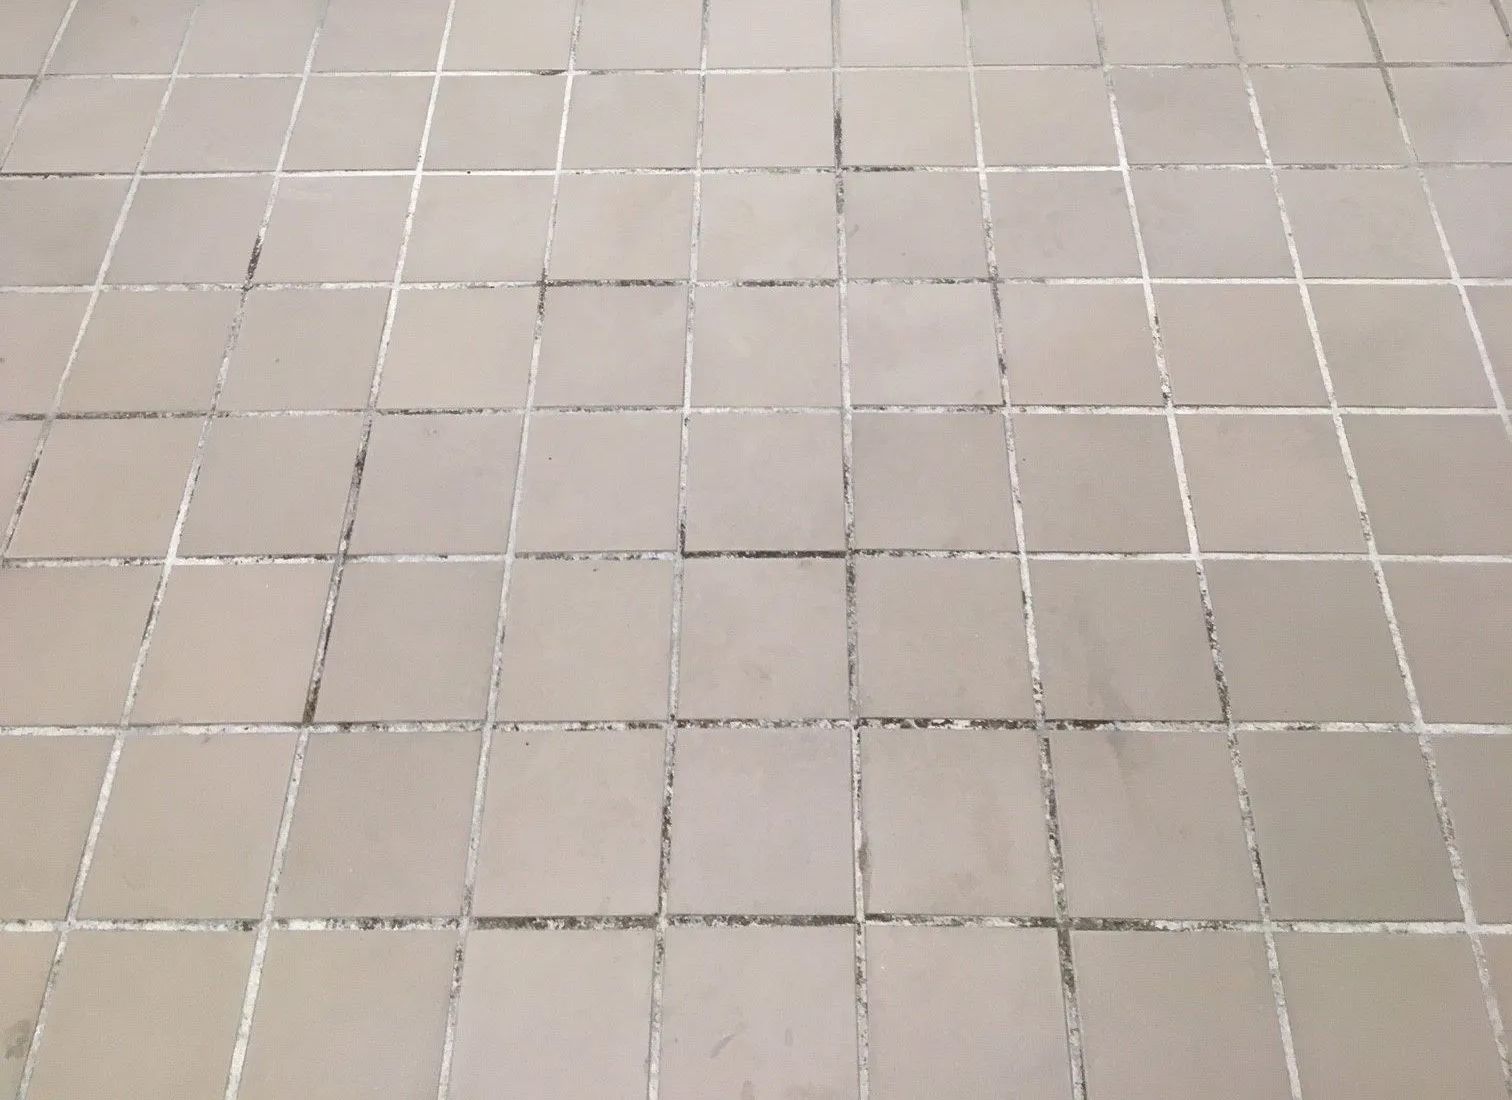 A close up of a tiled floor with white grout.